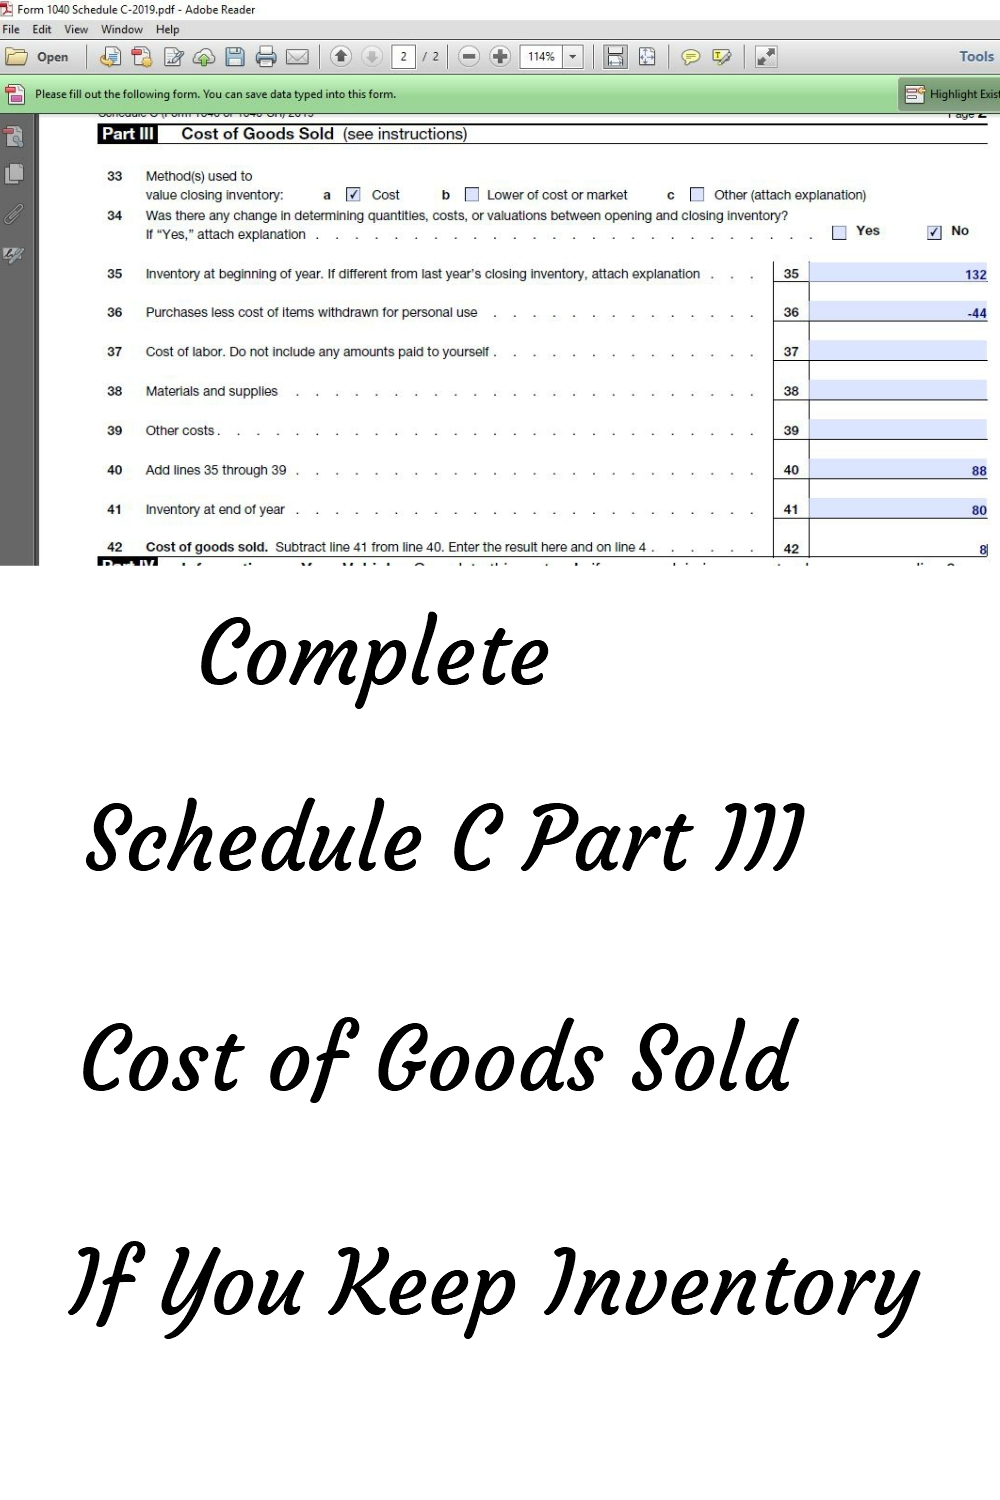 How to Fill Out Schedule C Form 1040 Profit or Loss from Business – Part III –Cost of Goods Sold